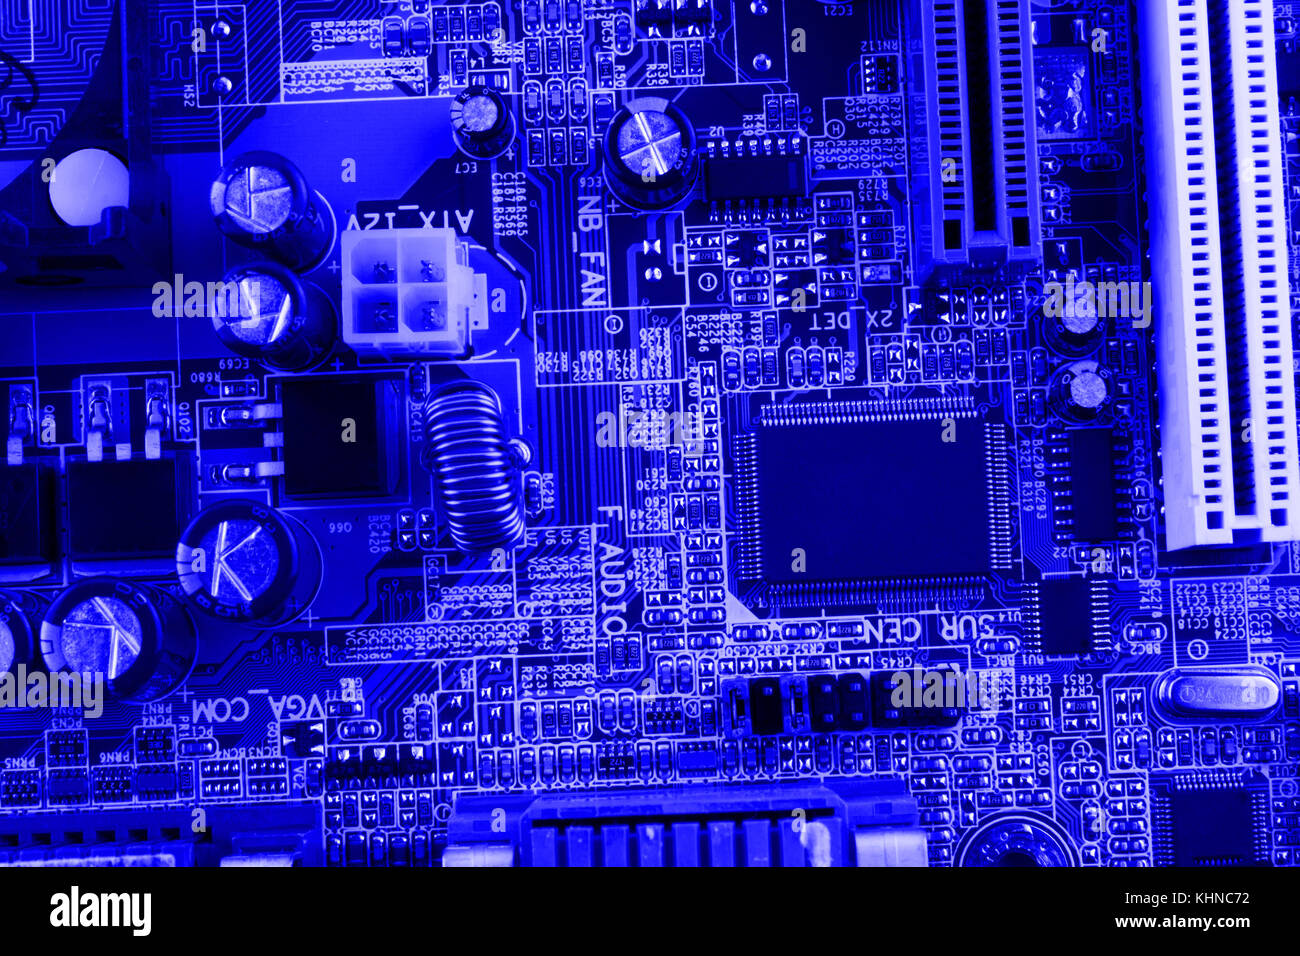 Integrated semiconductor microchip on blue circuit board representative of the high tech industry and computer science. Stock Photo